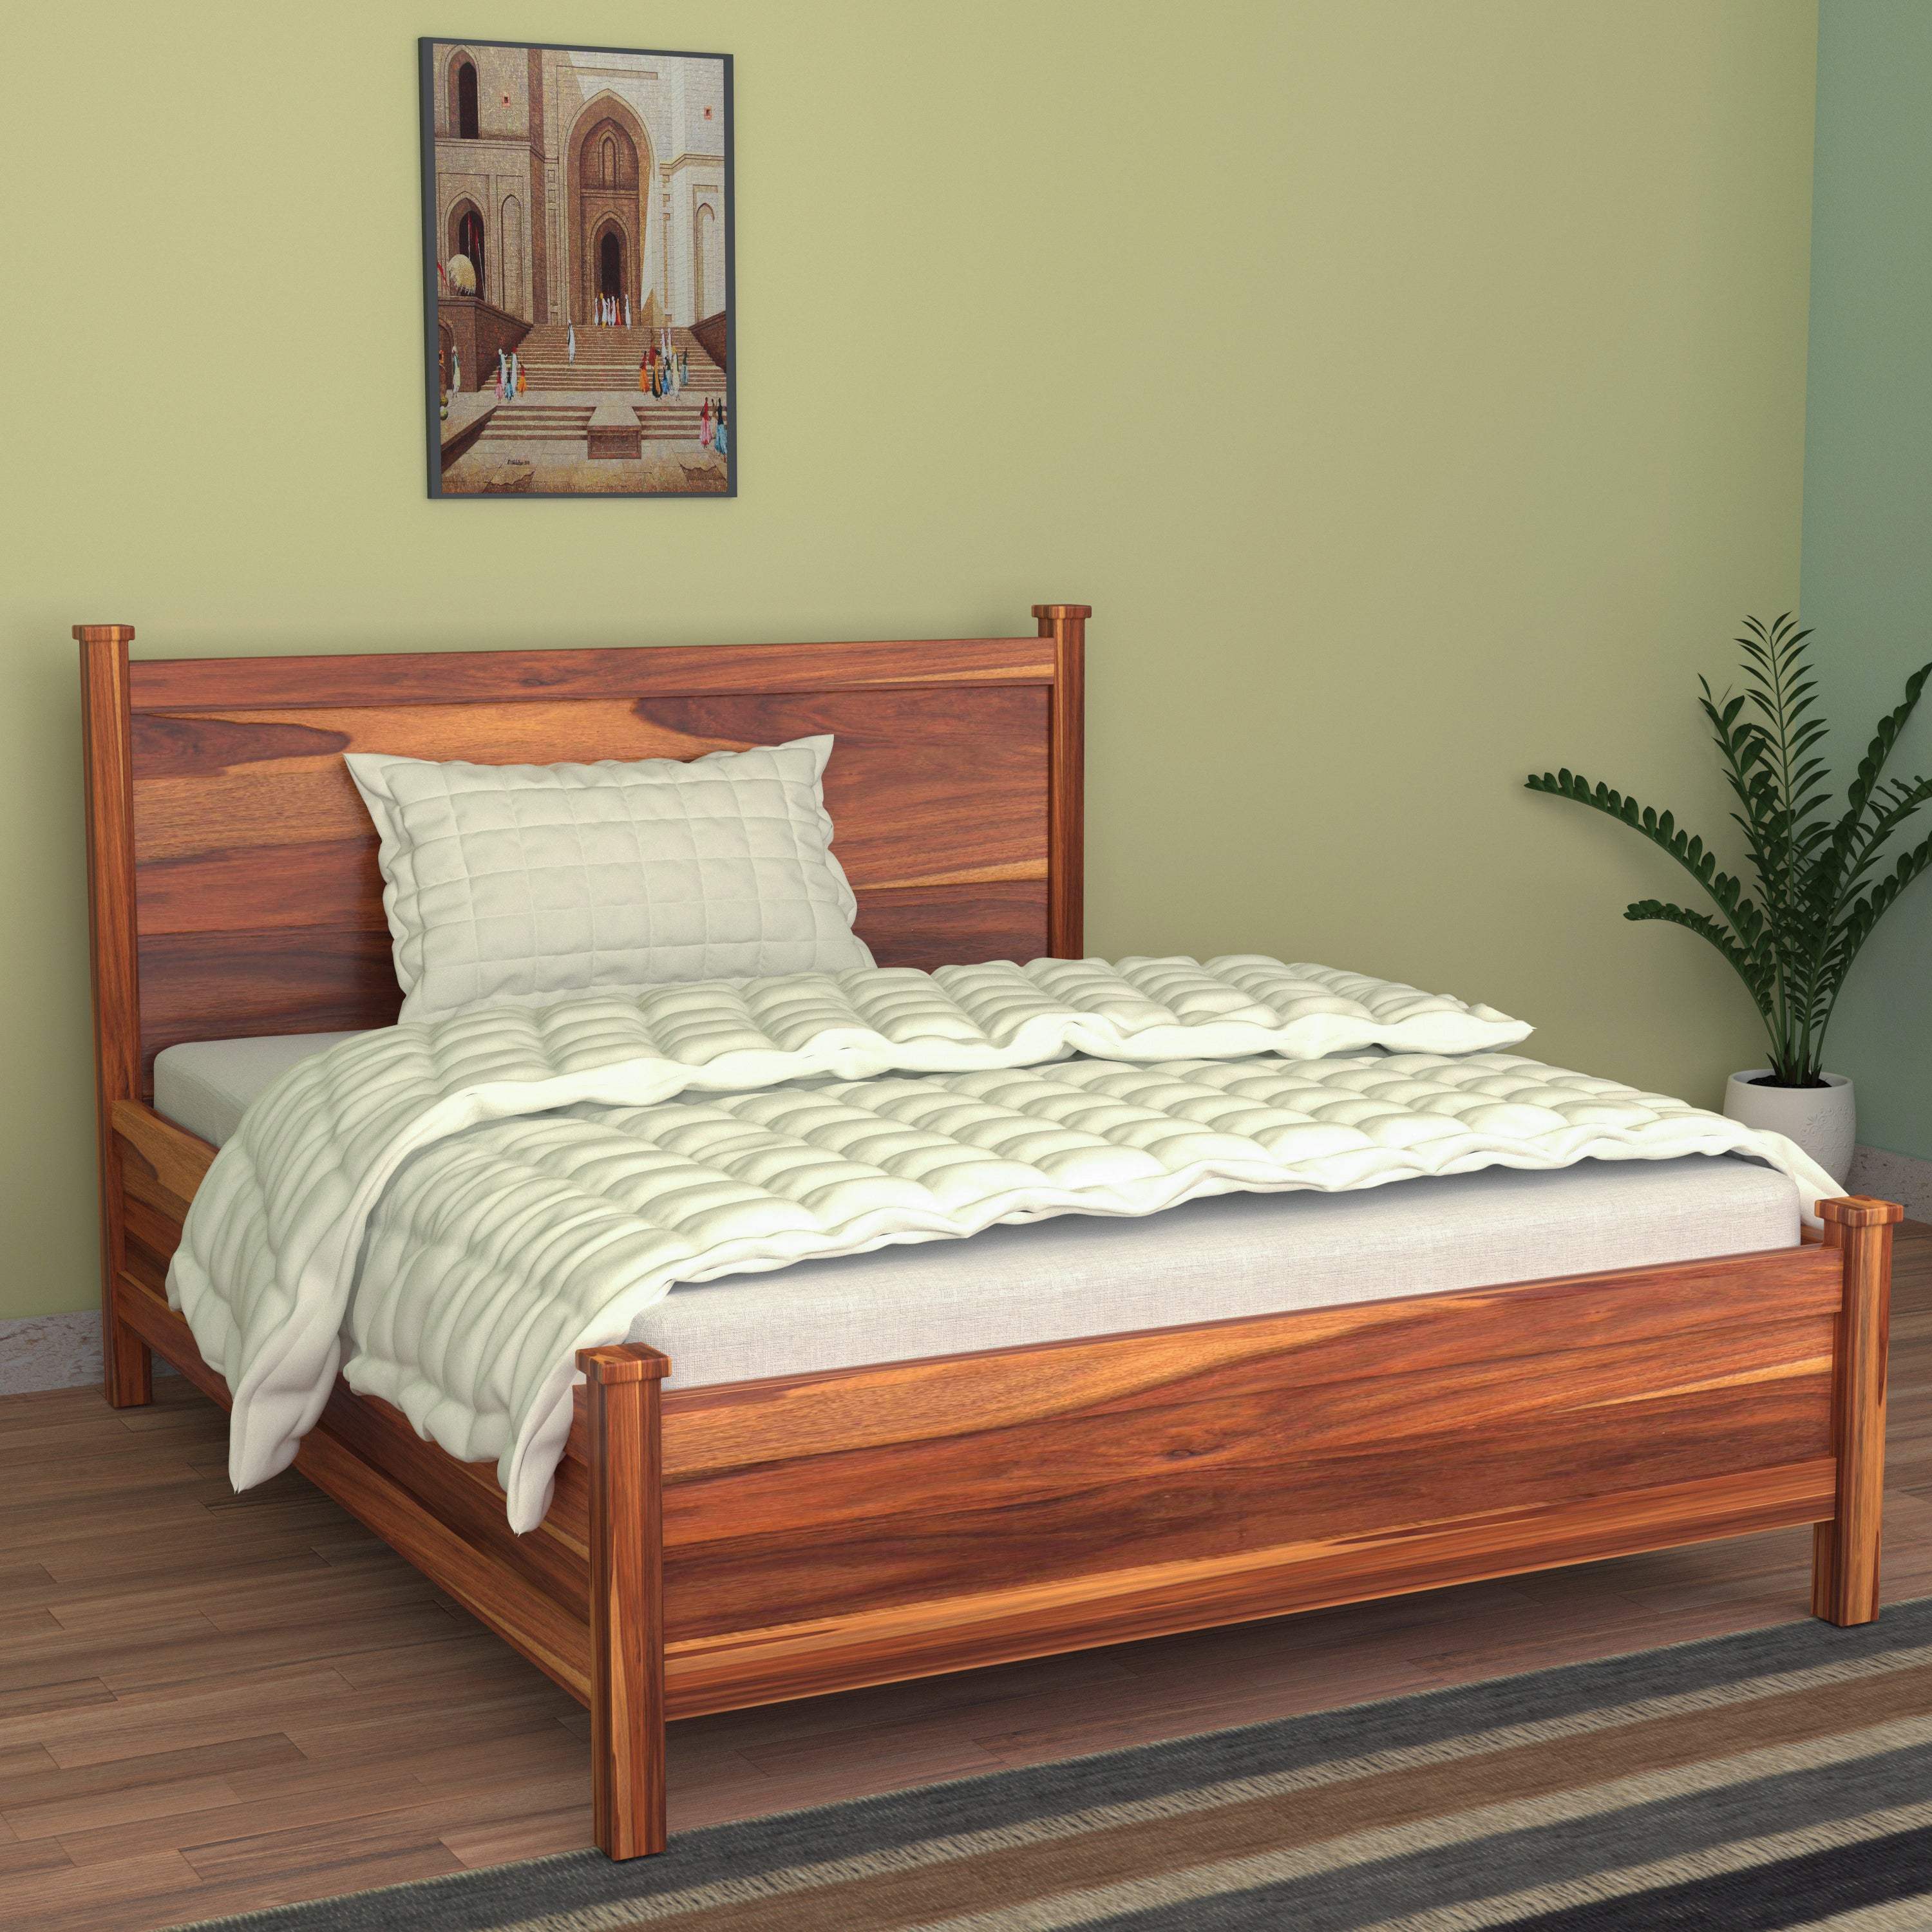 Montage Glint Finished Premium Handmade Wooden Bed for Home Bed